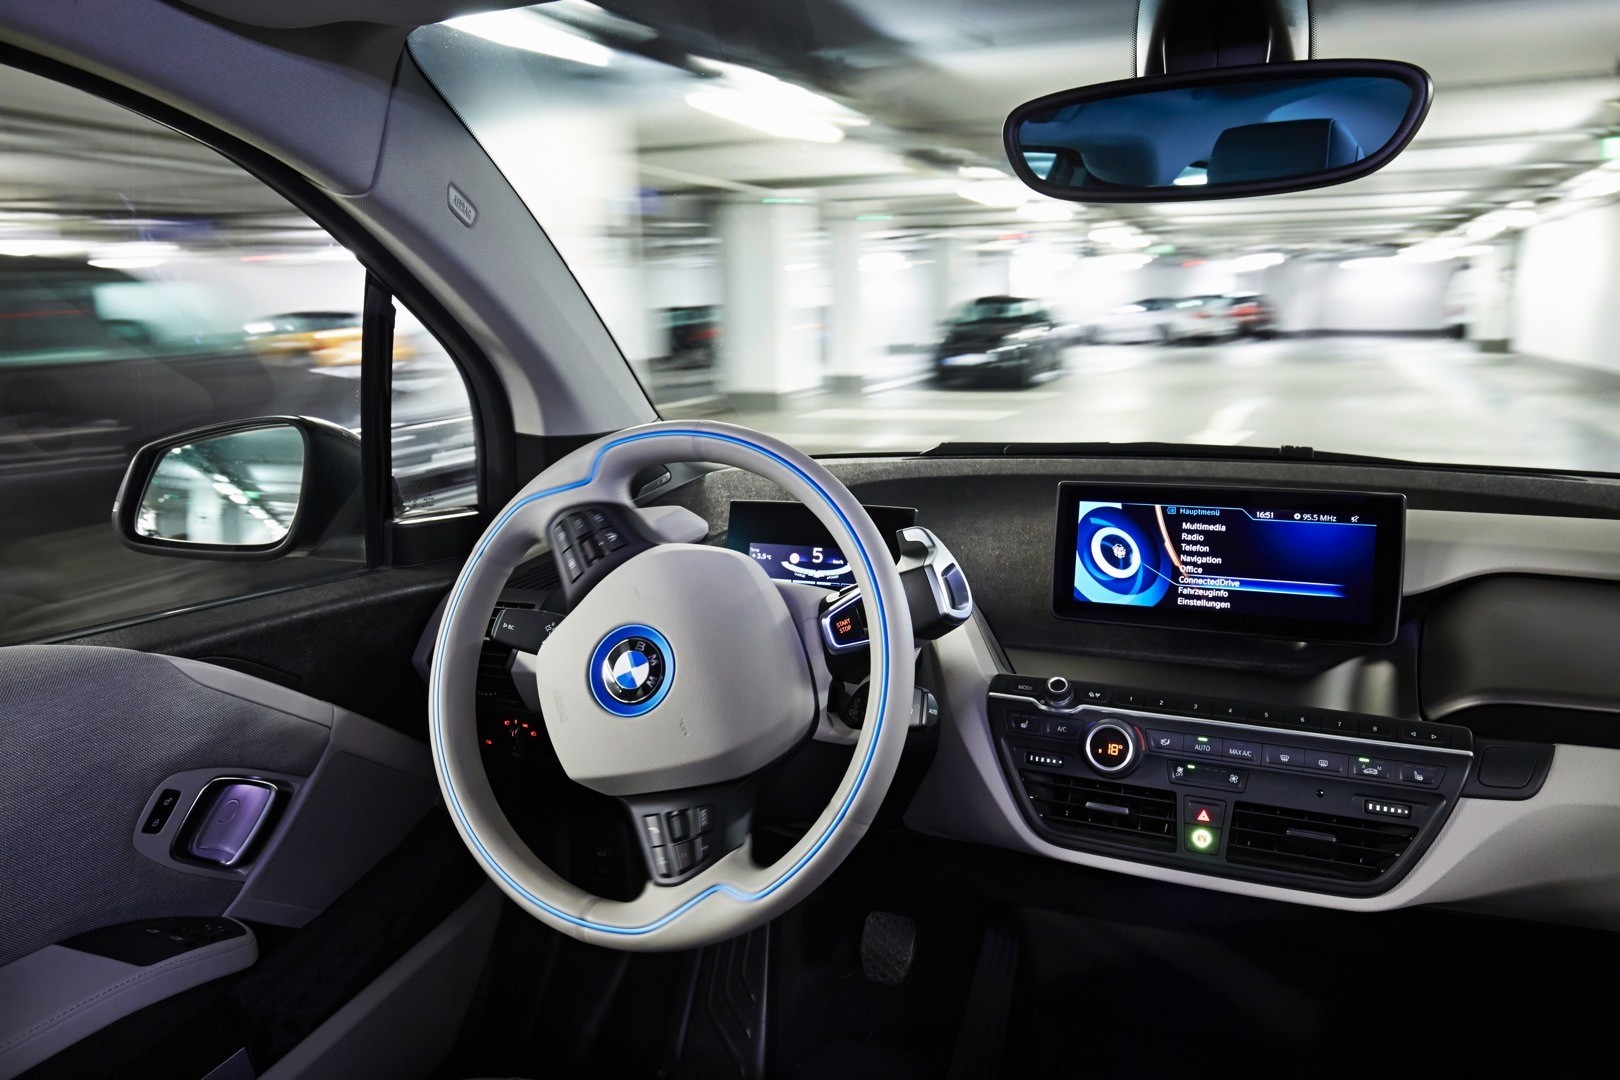 BMW Will Bring a Fully-Automated Parking i3 at 2015 CES, Previewing